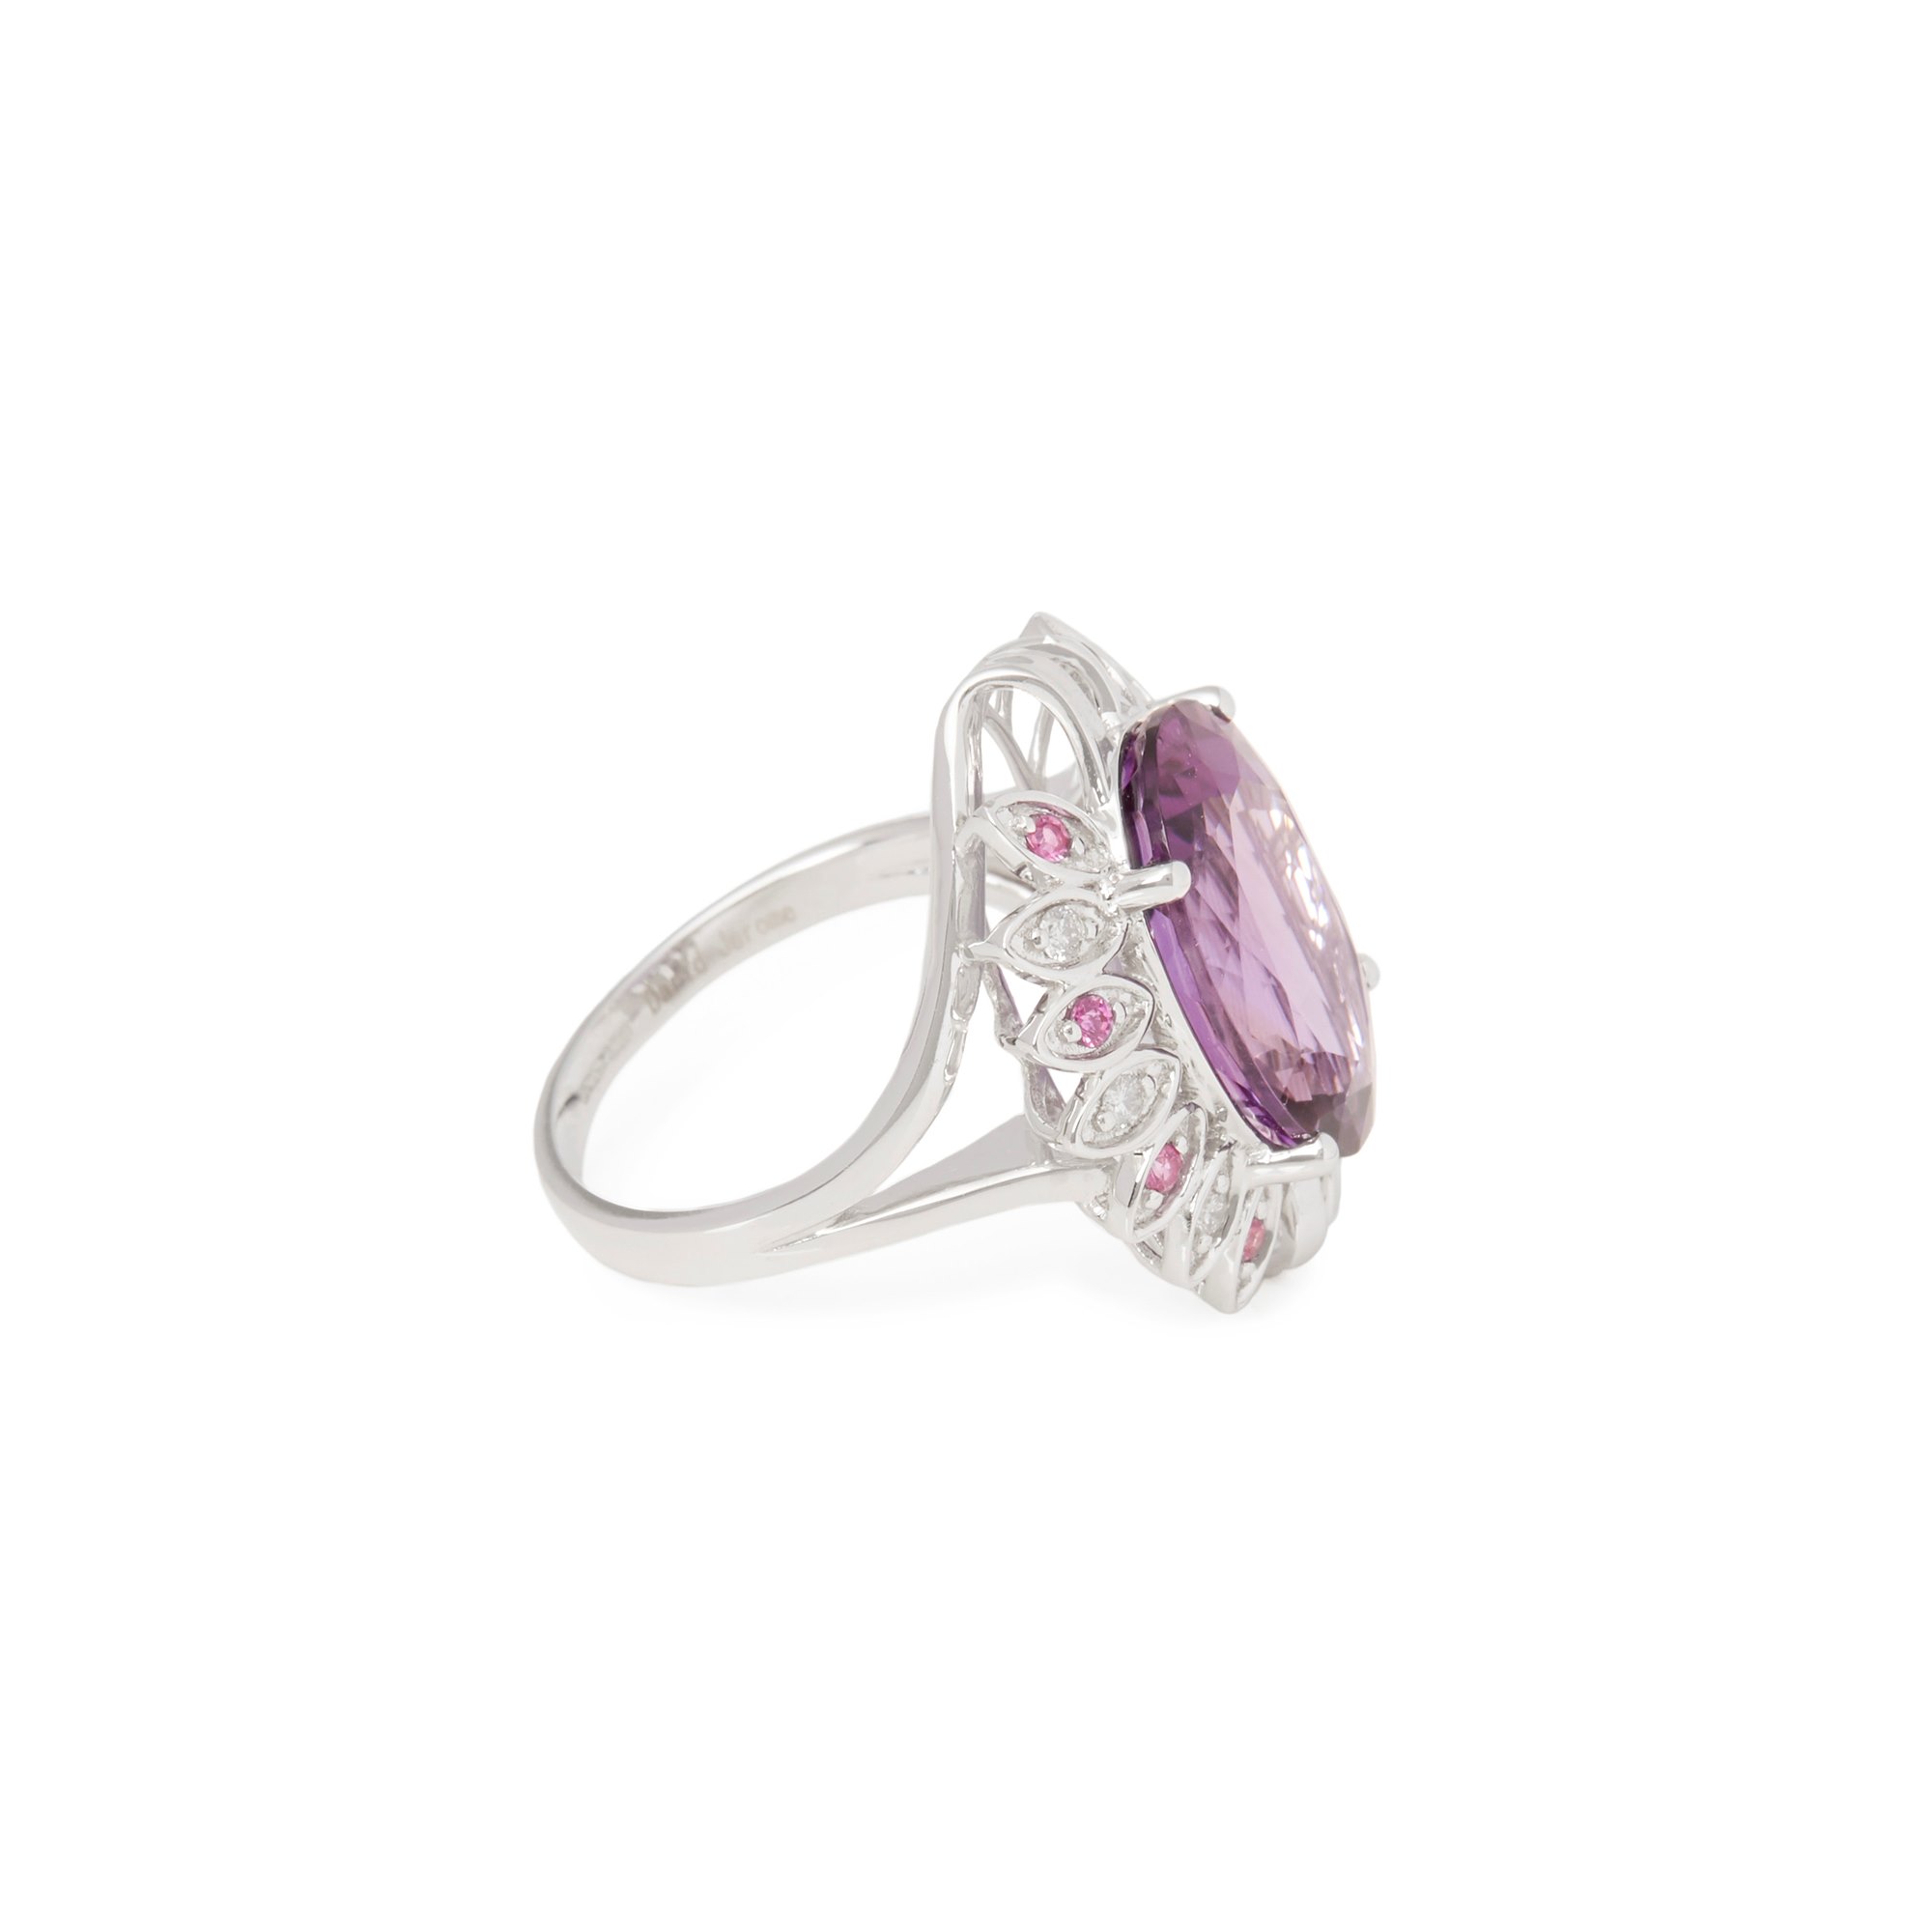 David Jerome Certified 7.07ct Untreated Russian Oval Cut Amethyst and Diamond 18ct gold Ring